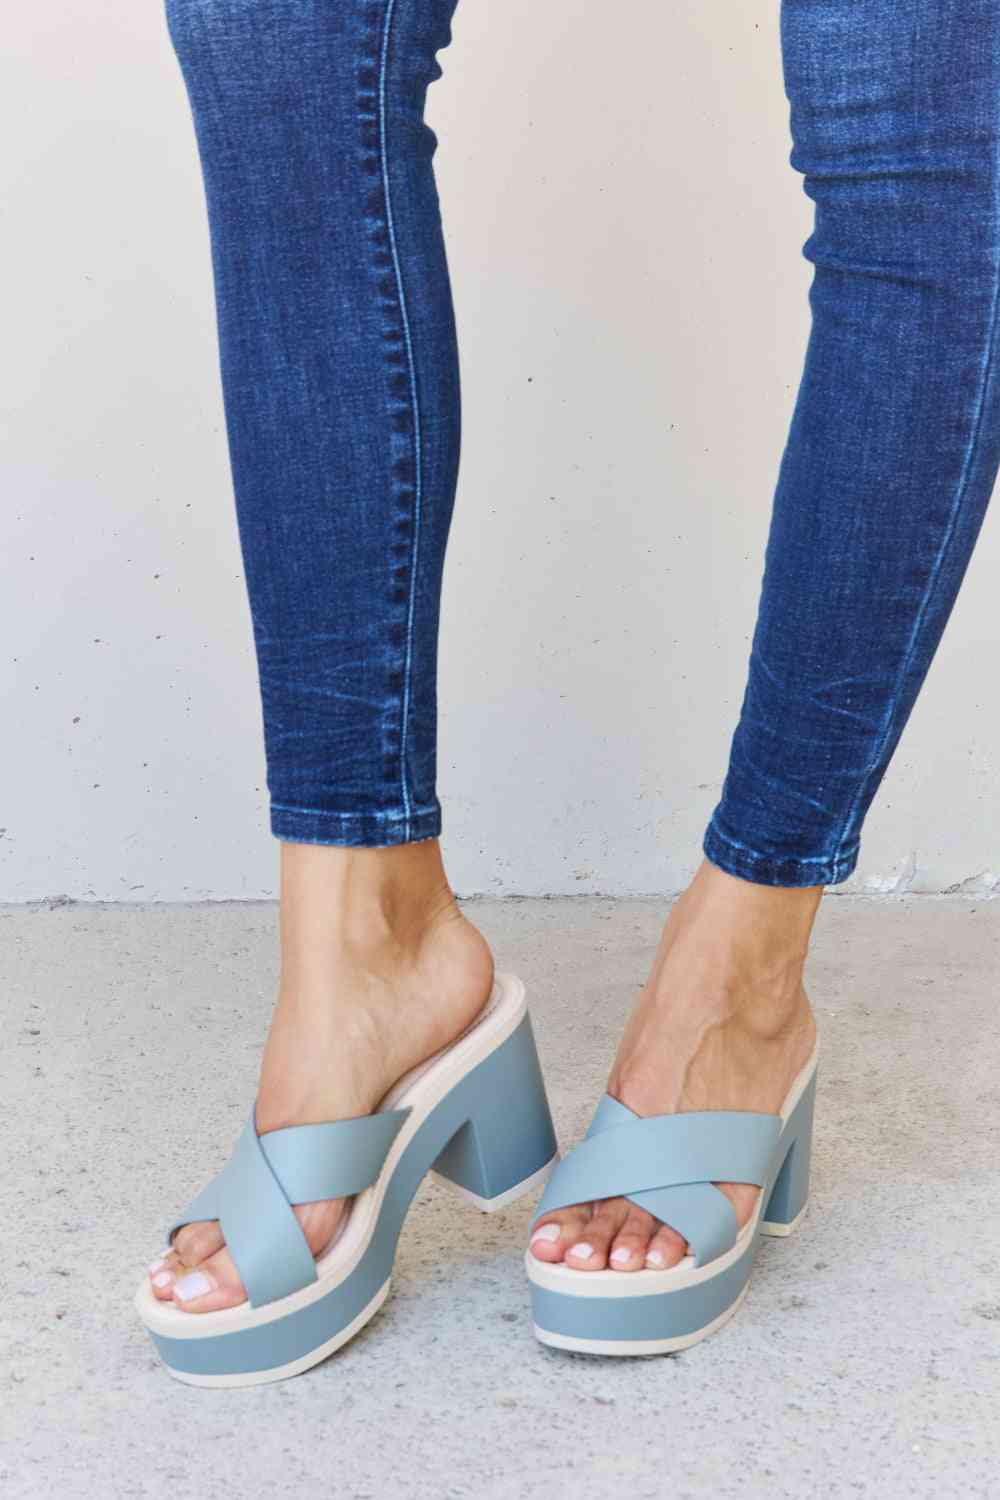 Weeboo Cherish The Moments Contrast Platform Sandals in Misty Blue Misty Blue